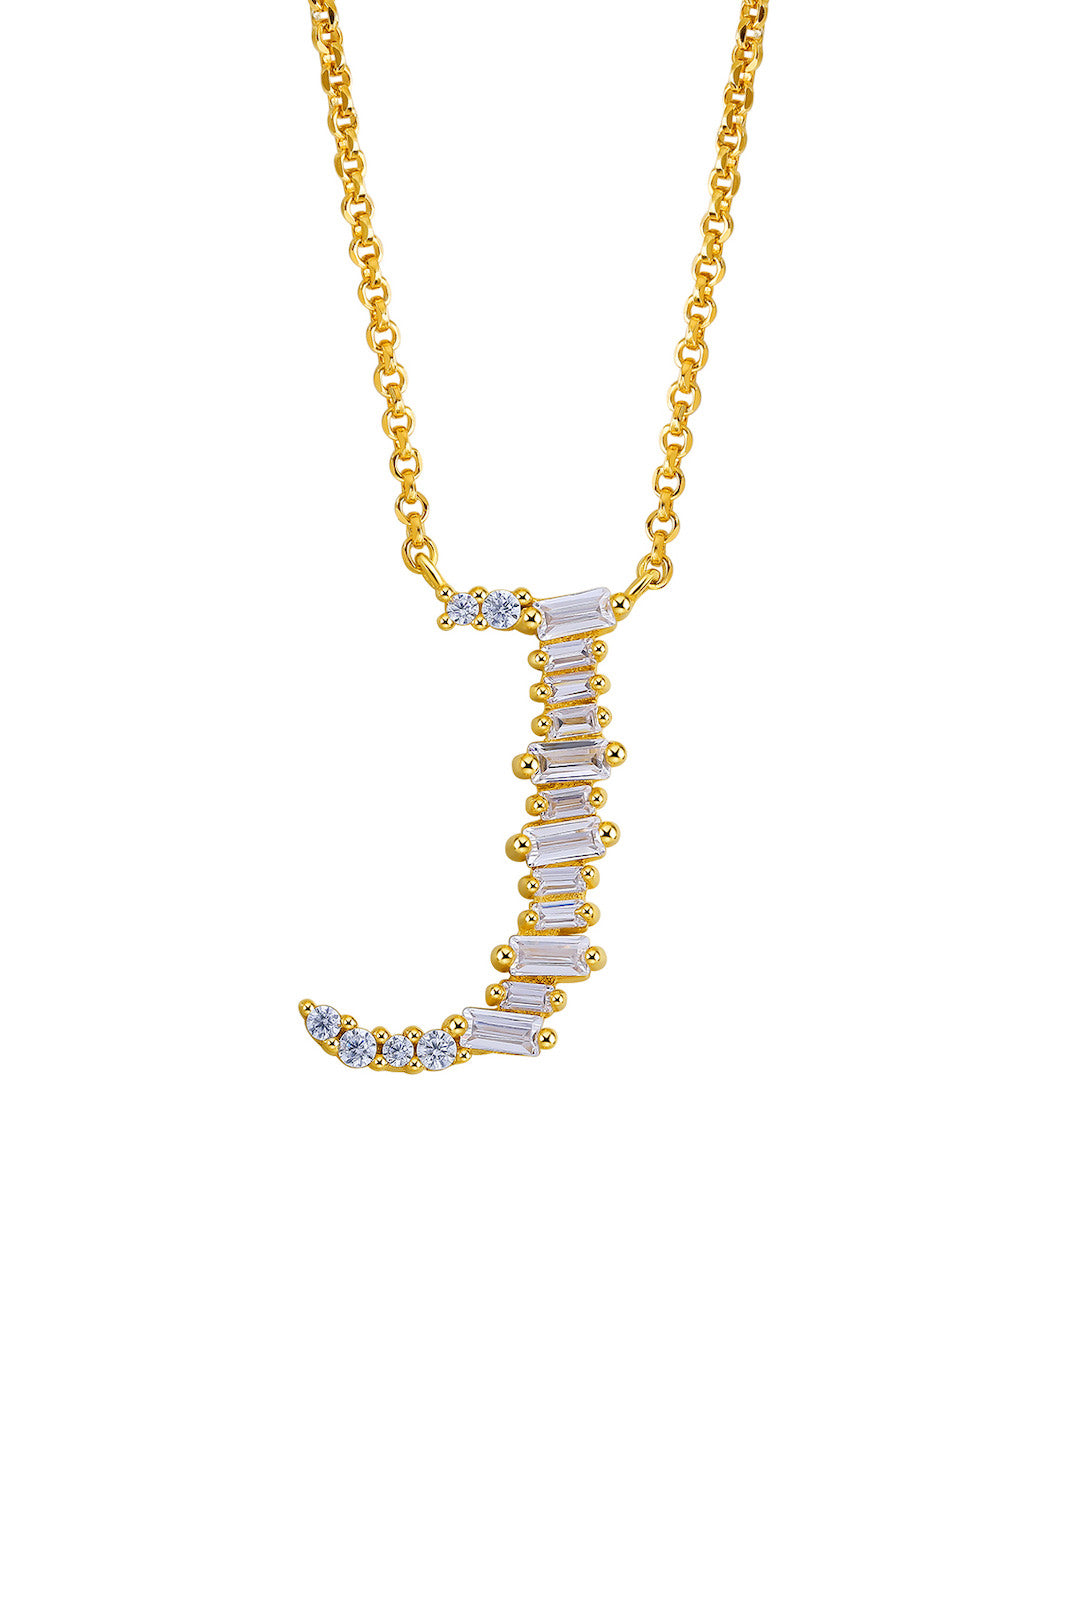 Gold Plated Sterling Silver Initial Necklace - Letter J Detail